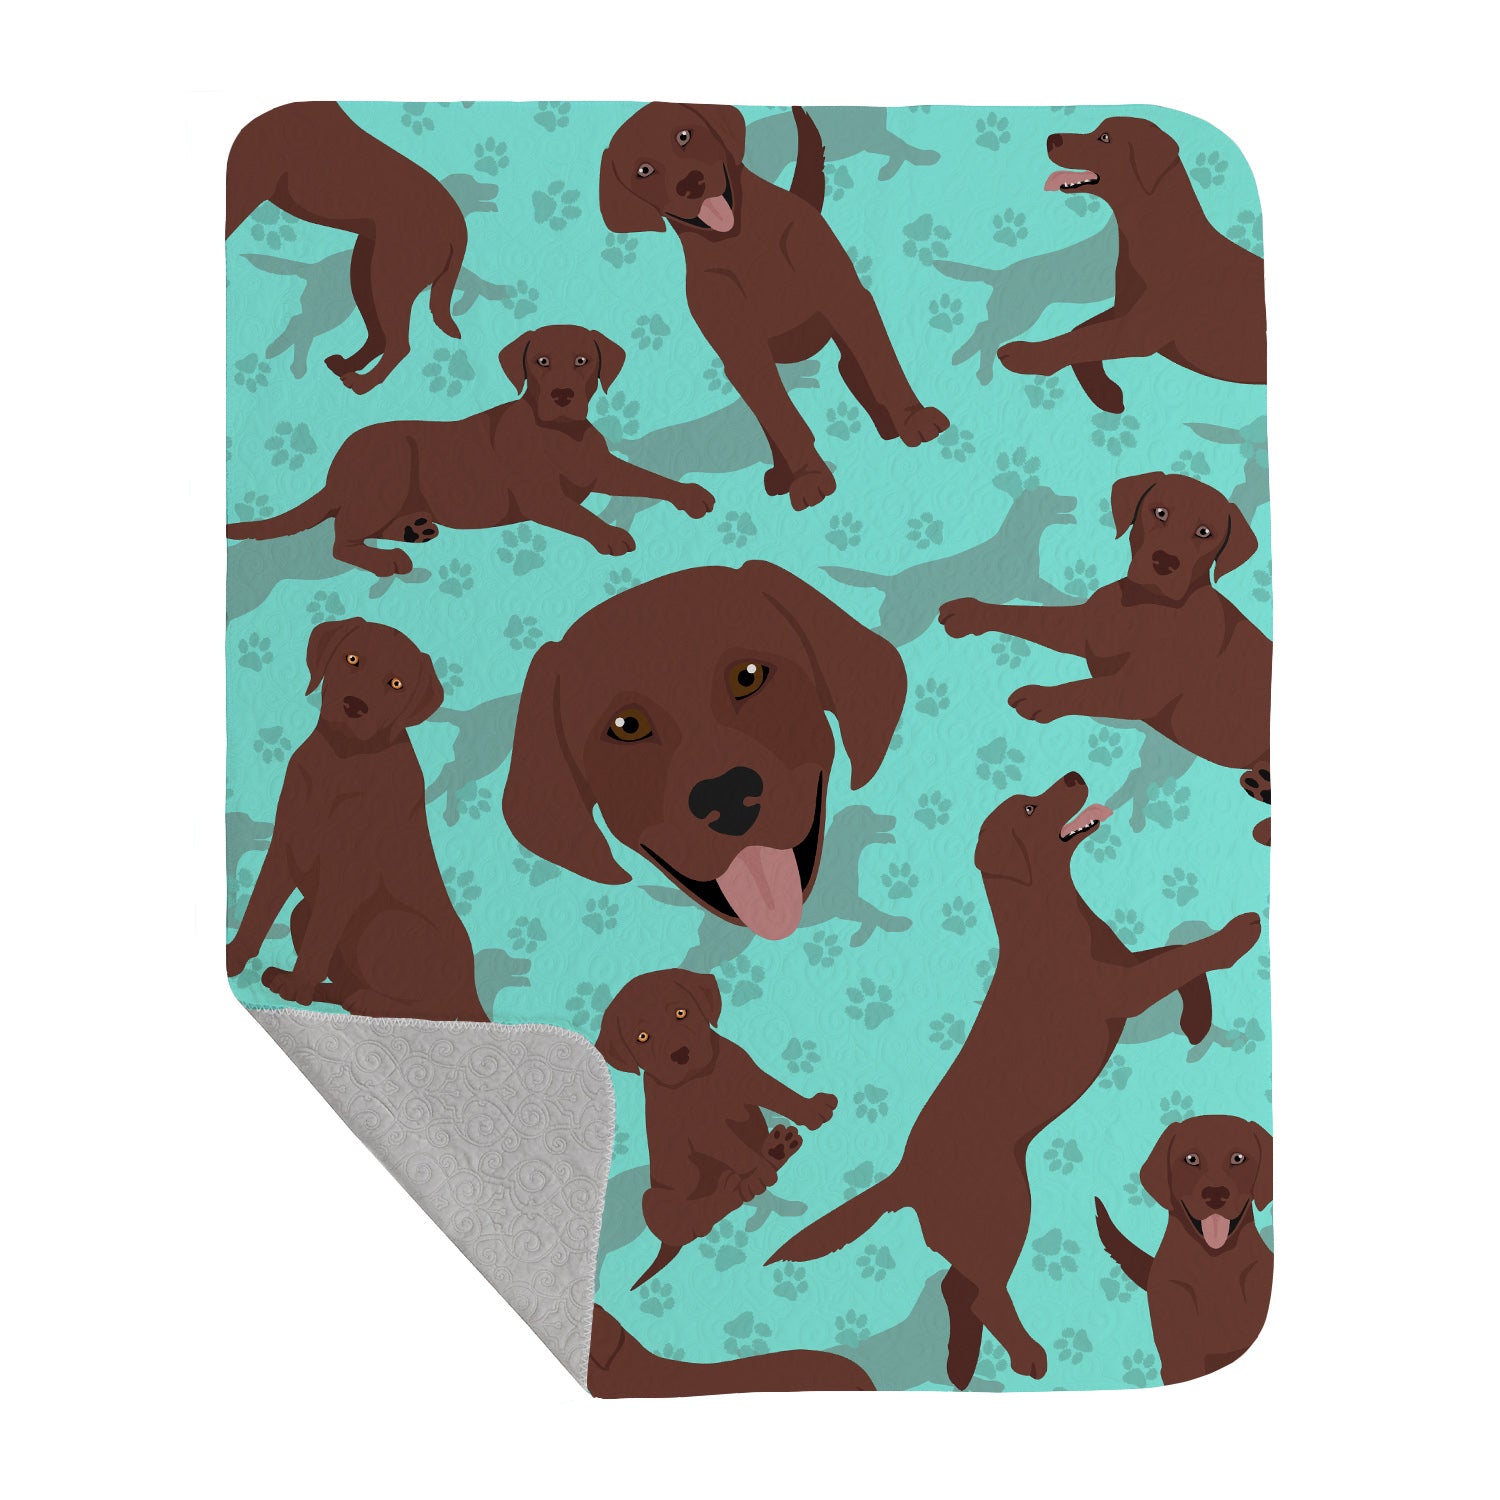 Buy this Chocolate Labrador Retriever Quilted Blanket 50x60